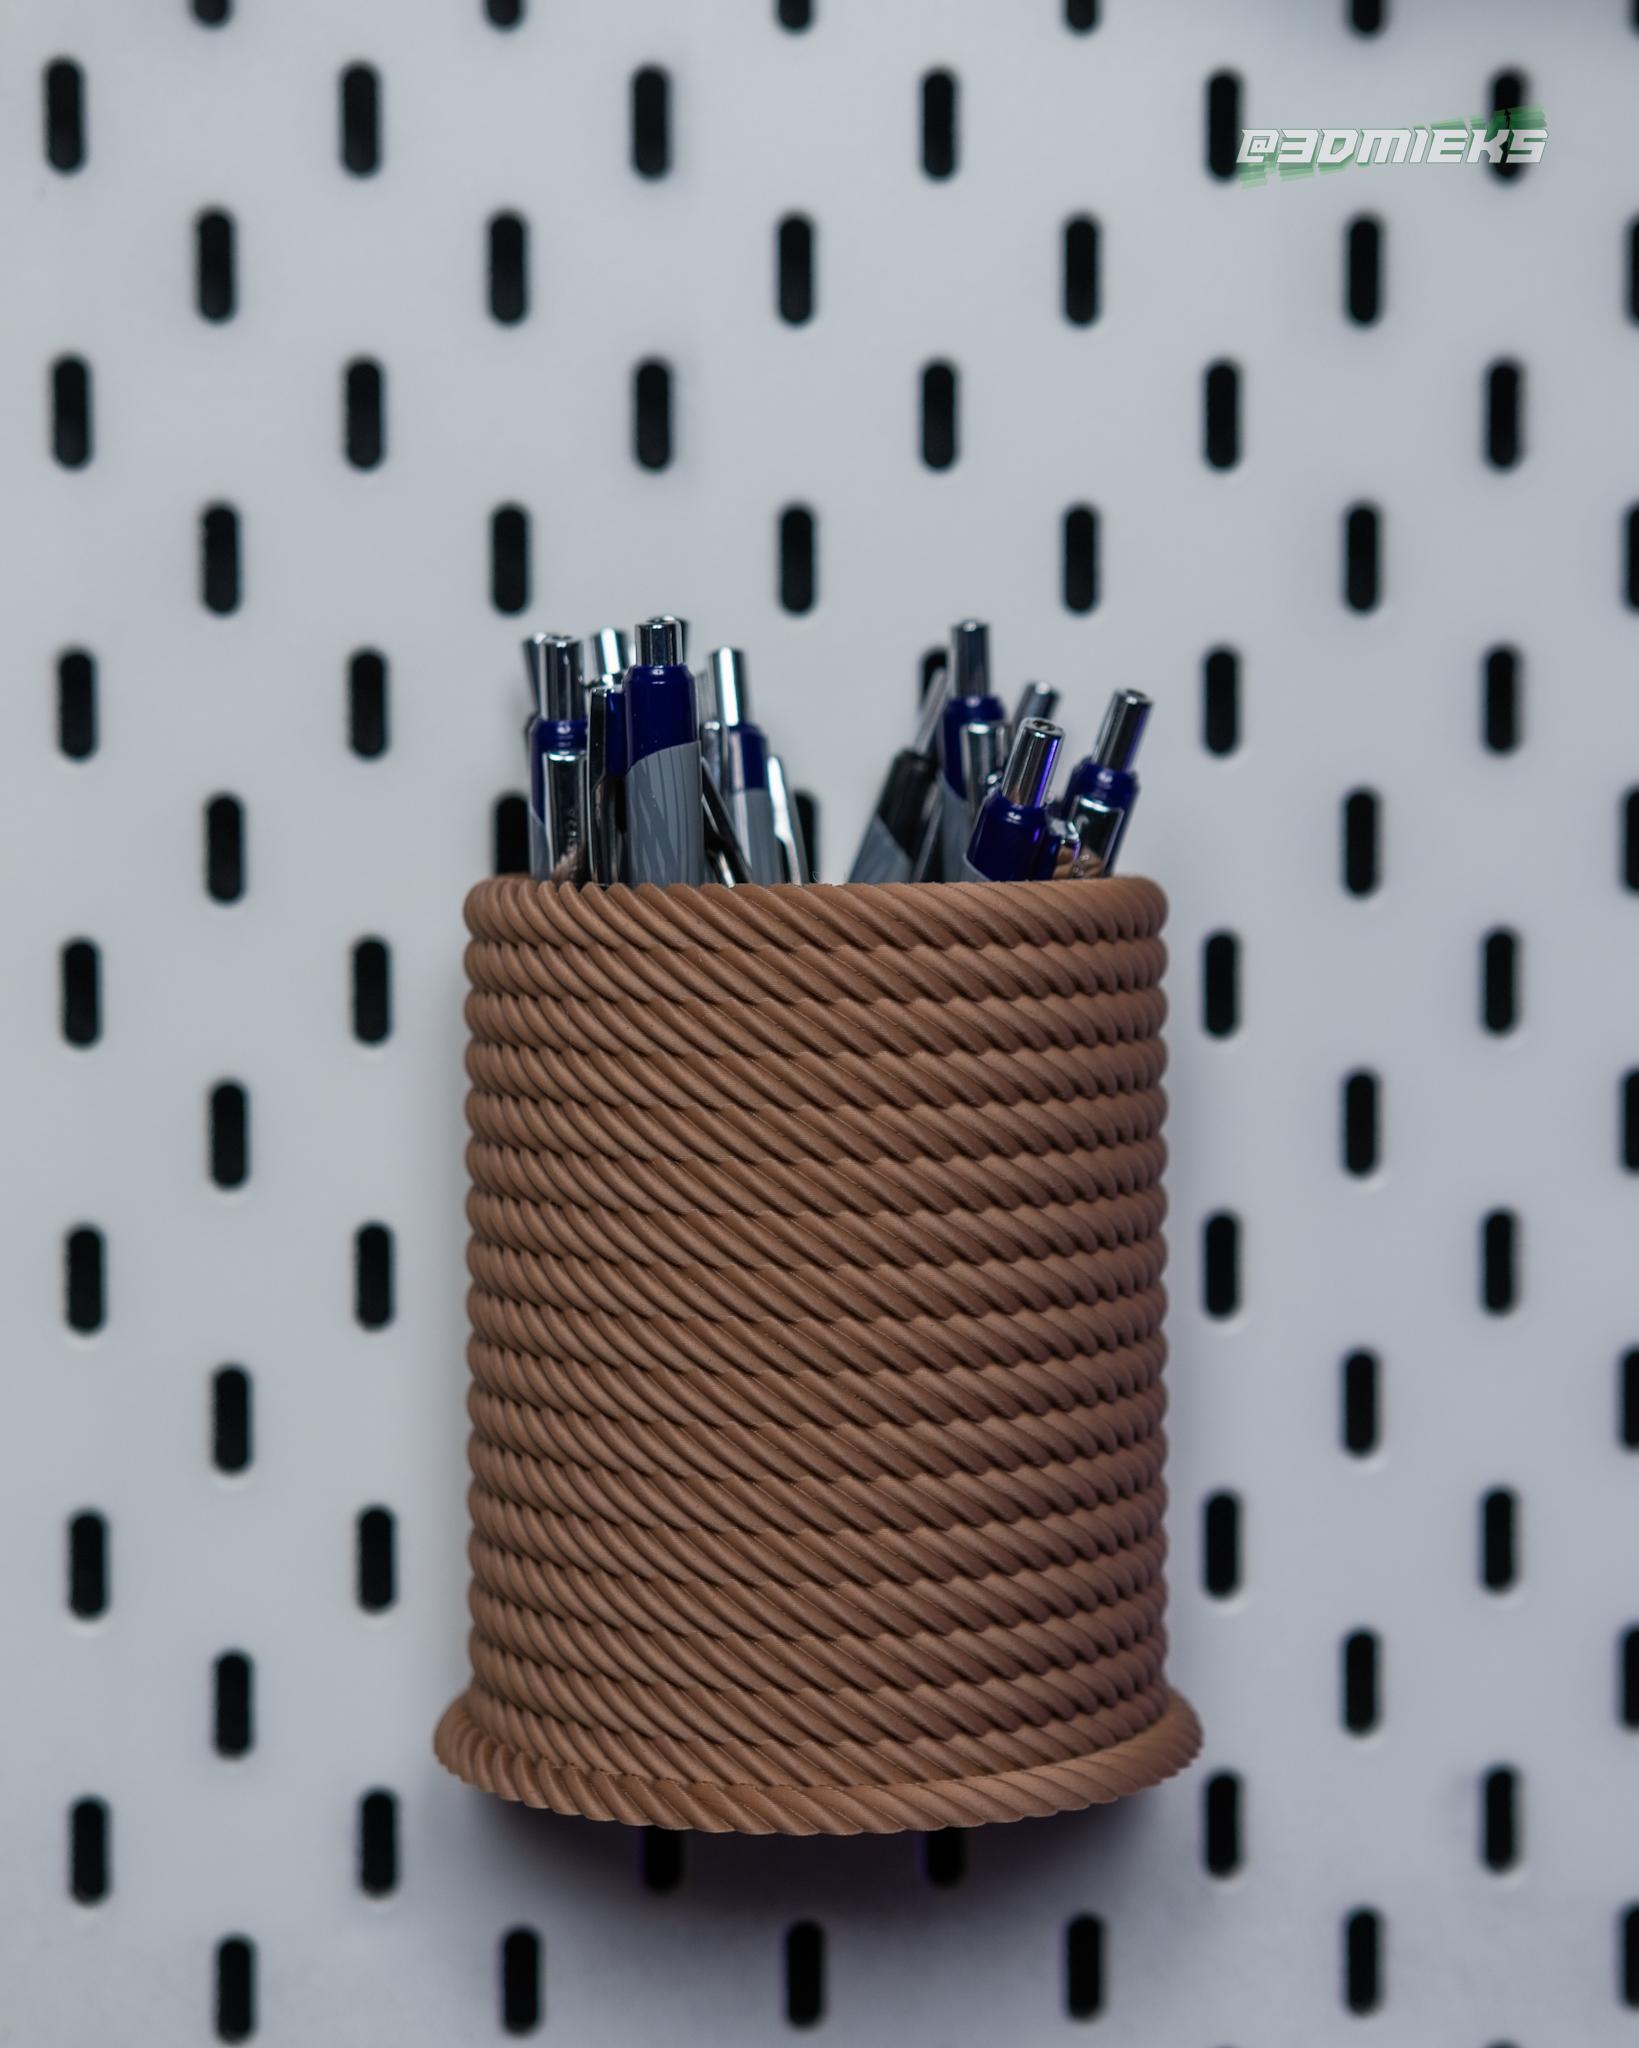 Rope Series | Pencil Holder Cup for IKEA Skadis Boards 3d model